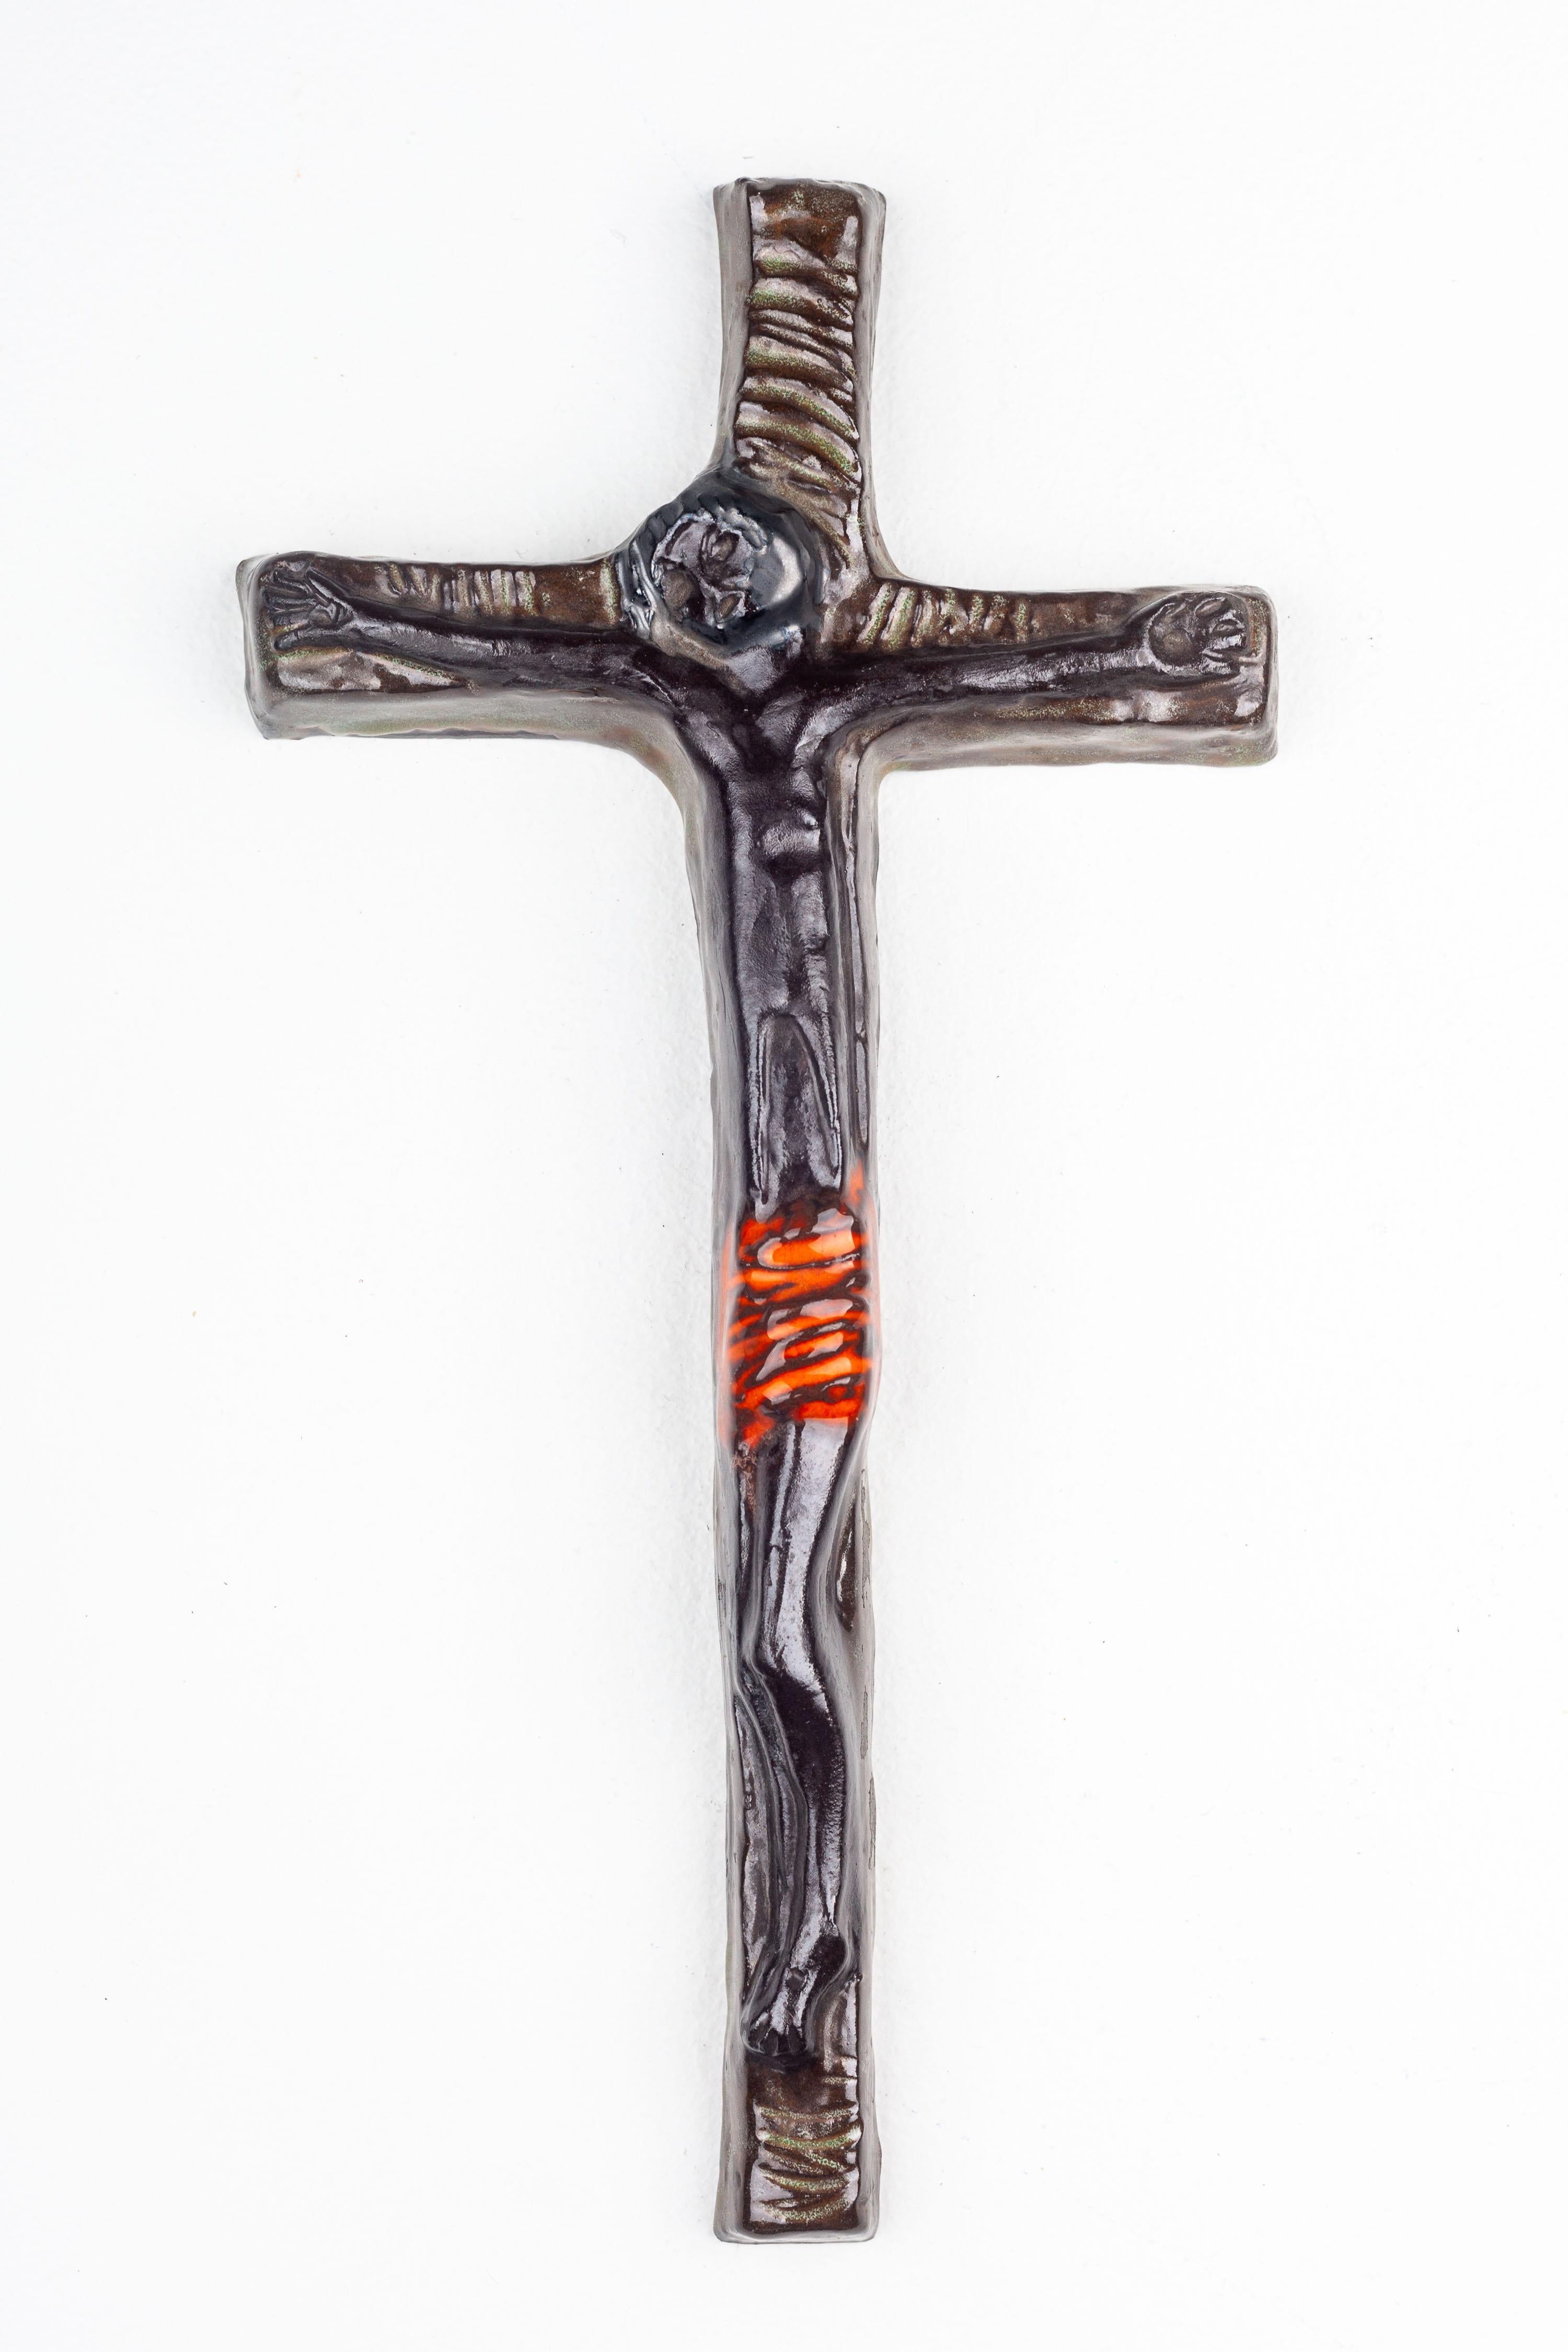 This ceramic crucifix is a profound representation of mid-century modern European studio artistry. Handcrafted with precision and care, it reflects the era's characteristic blend of traditional themes and modernist design principles. The cross,